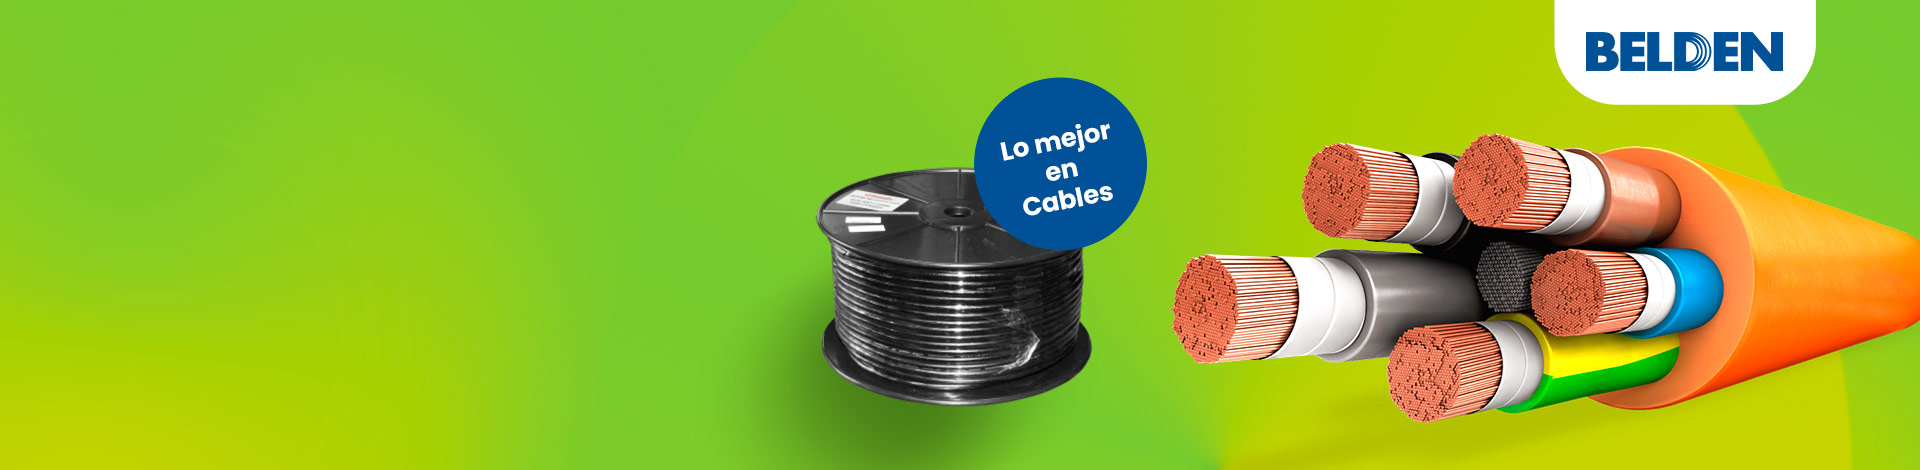 BANNER-CABLES-INDUSTRIALES-001